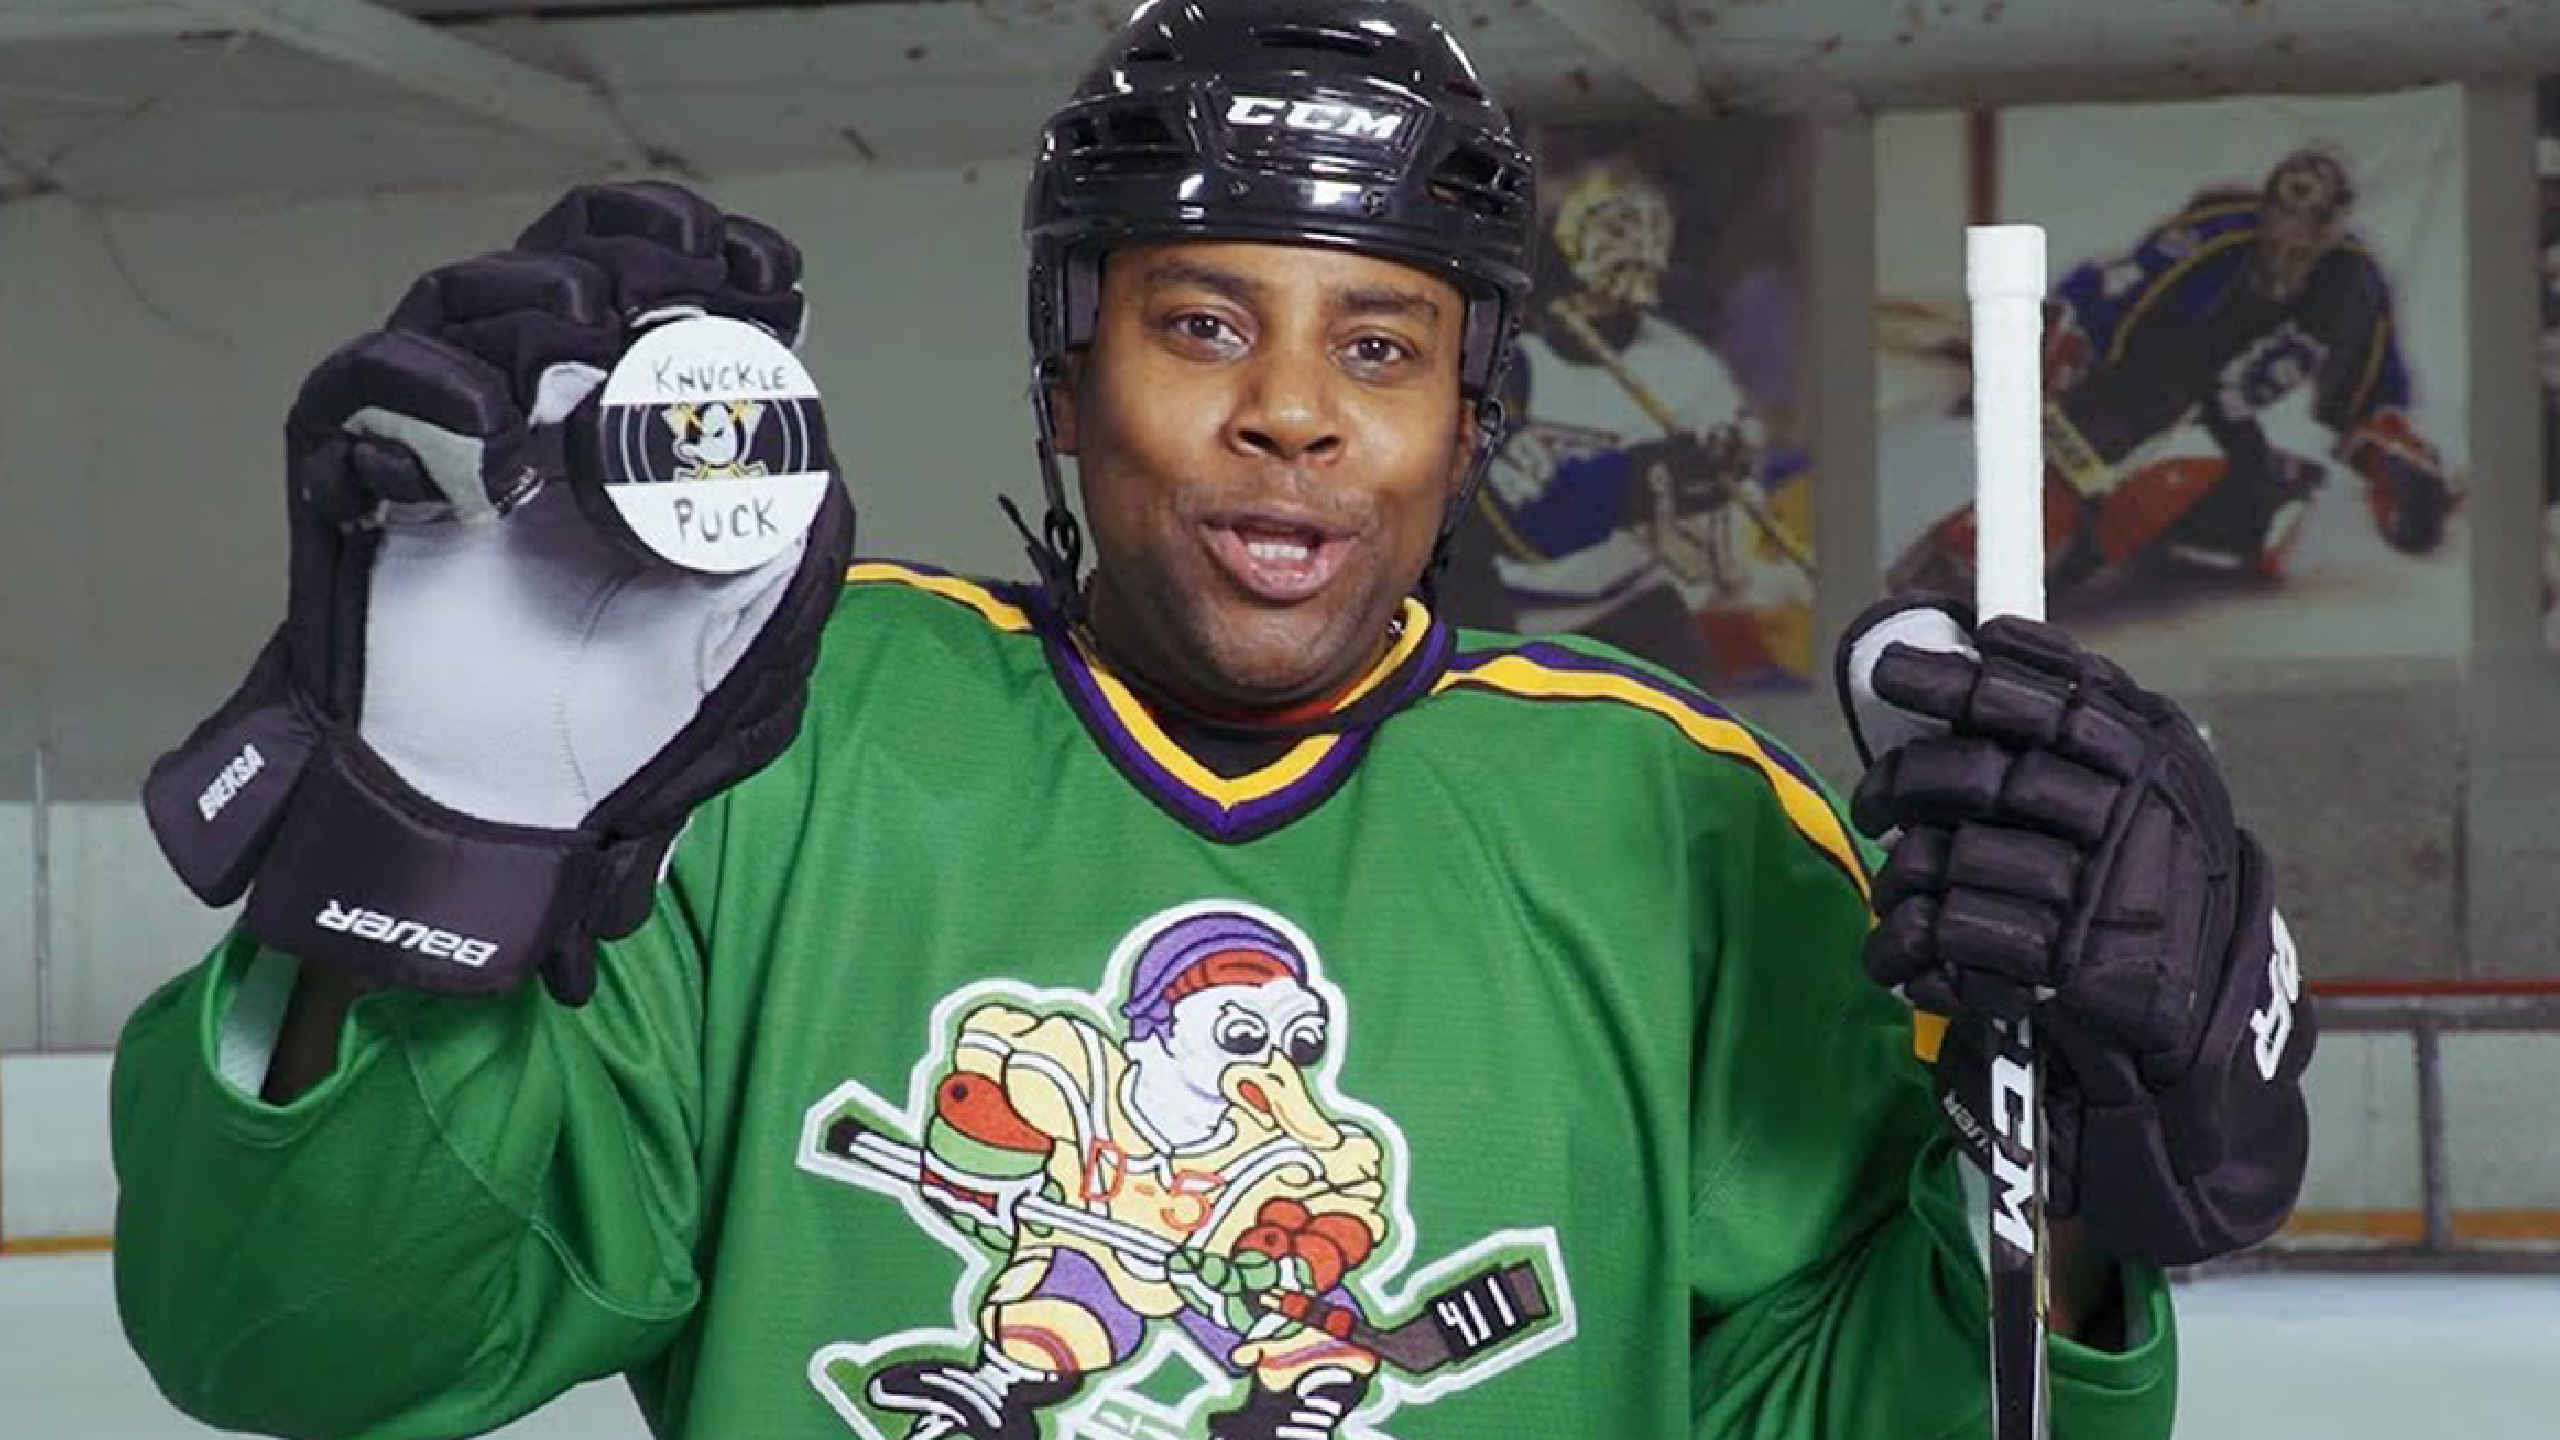 Kenan Could Return to the mighty ducks